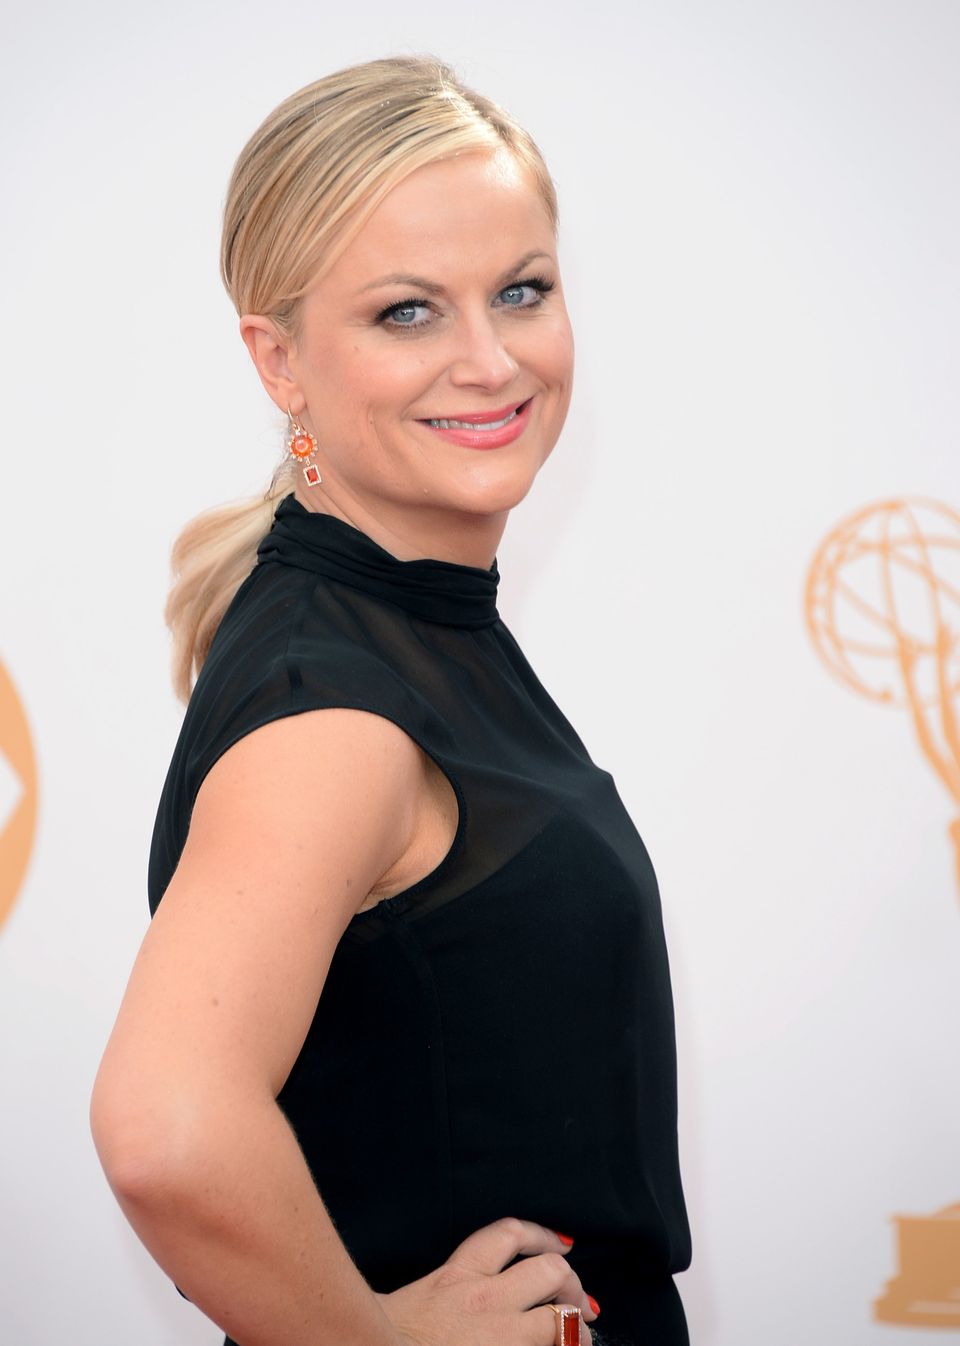 Amy Poehler, "Parks and Recreation"